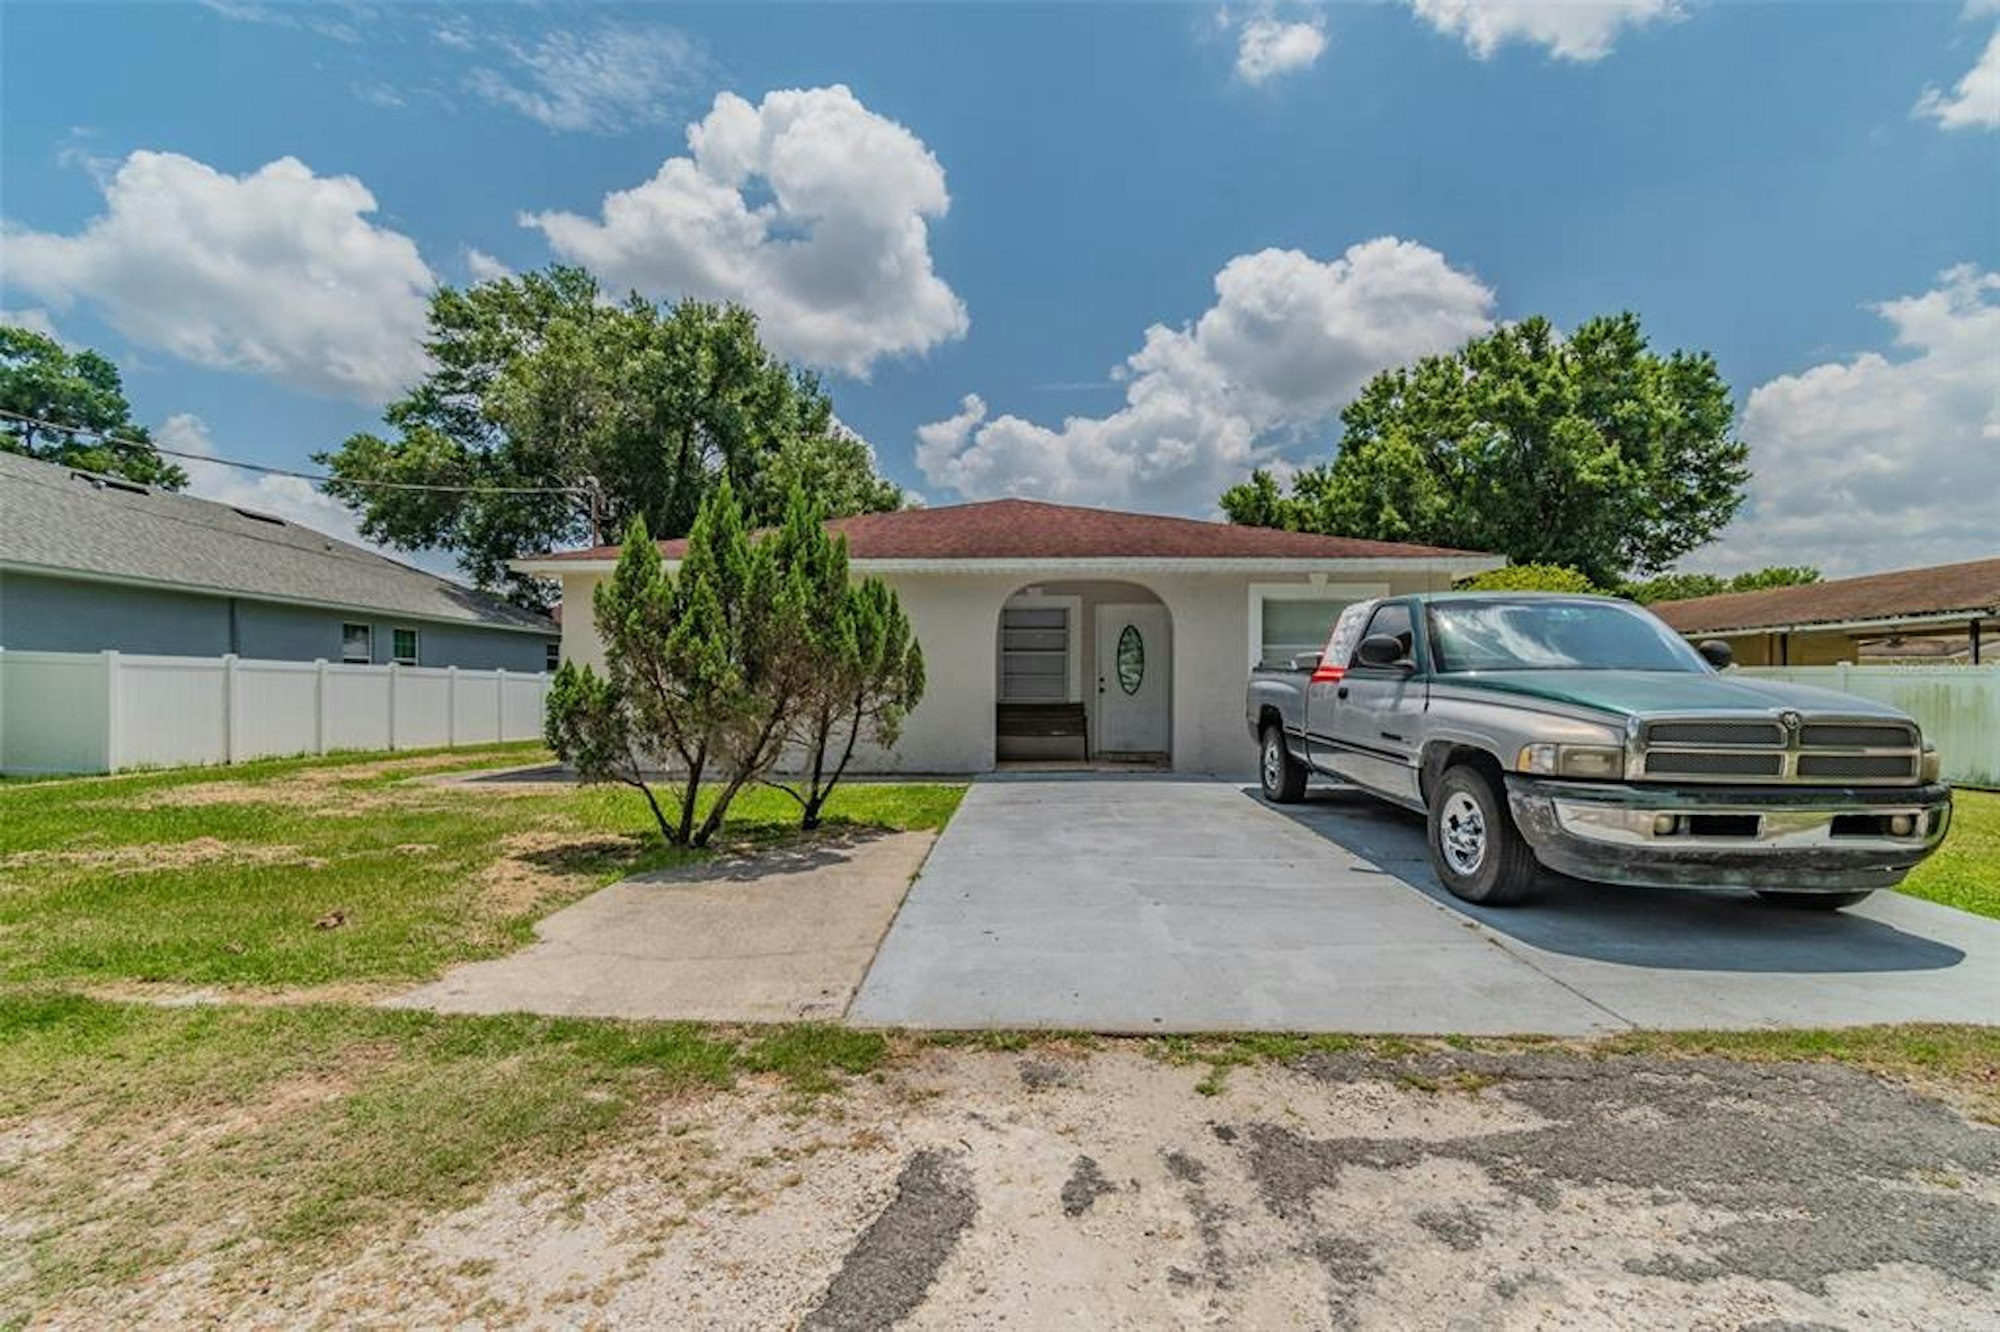 Photo 1 of 40 - 8107 N Lois Ave, Tampa, FL 33614